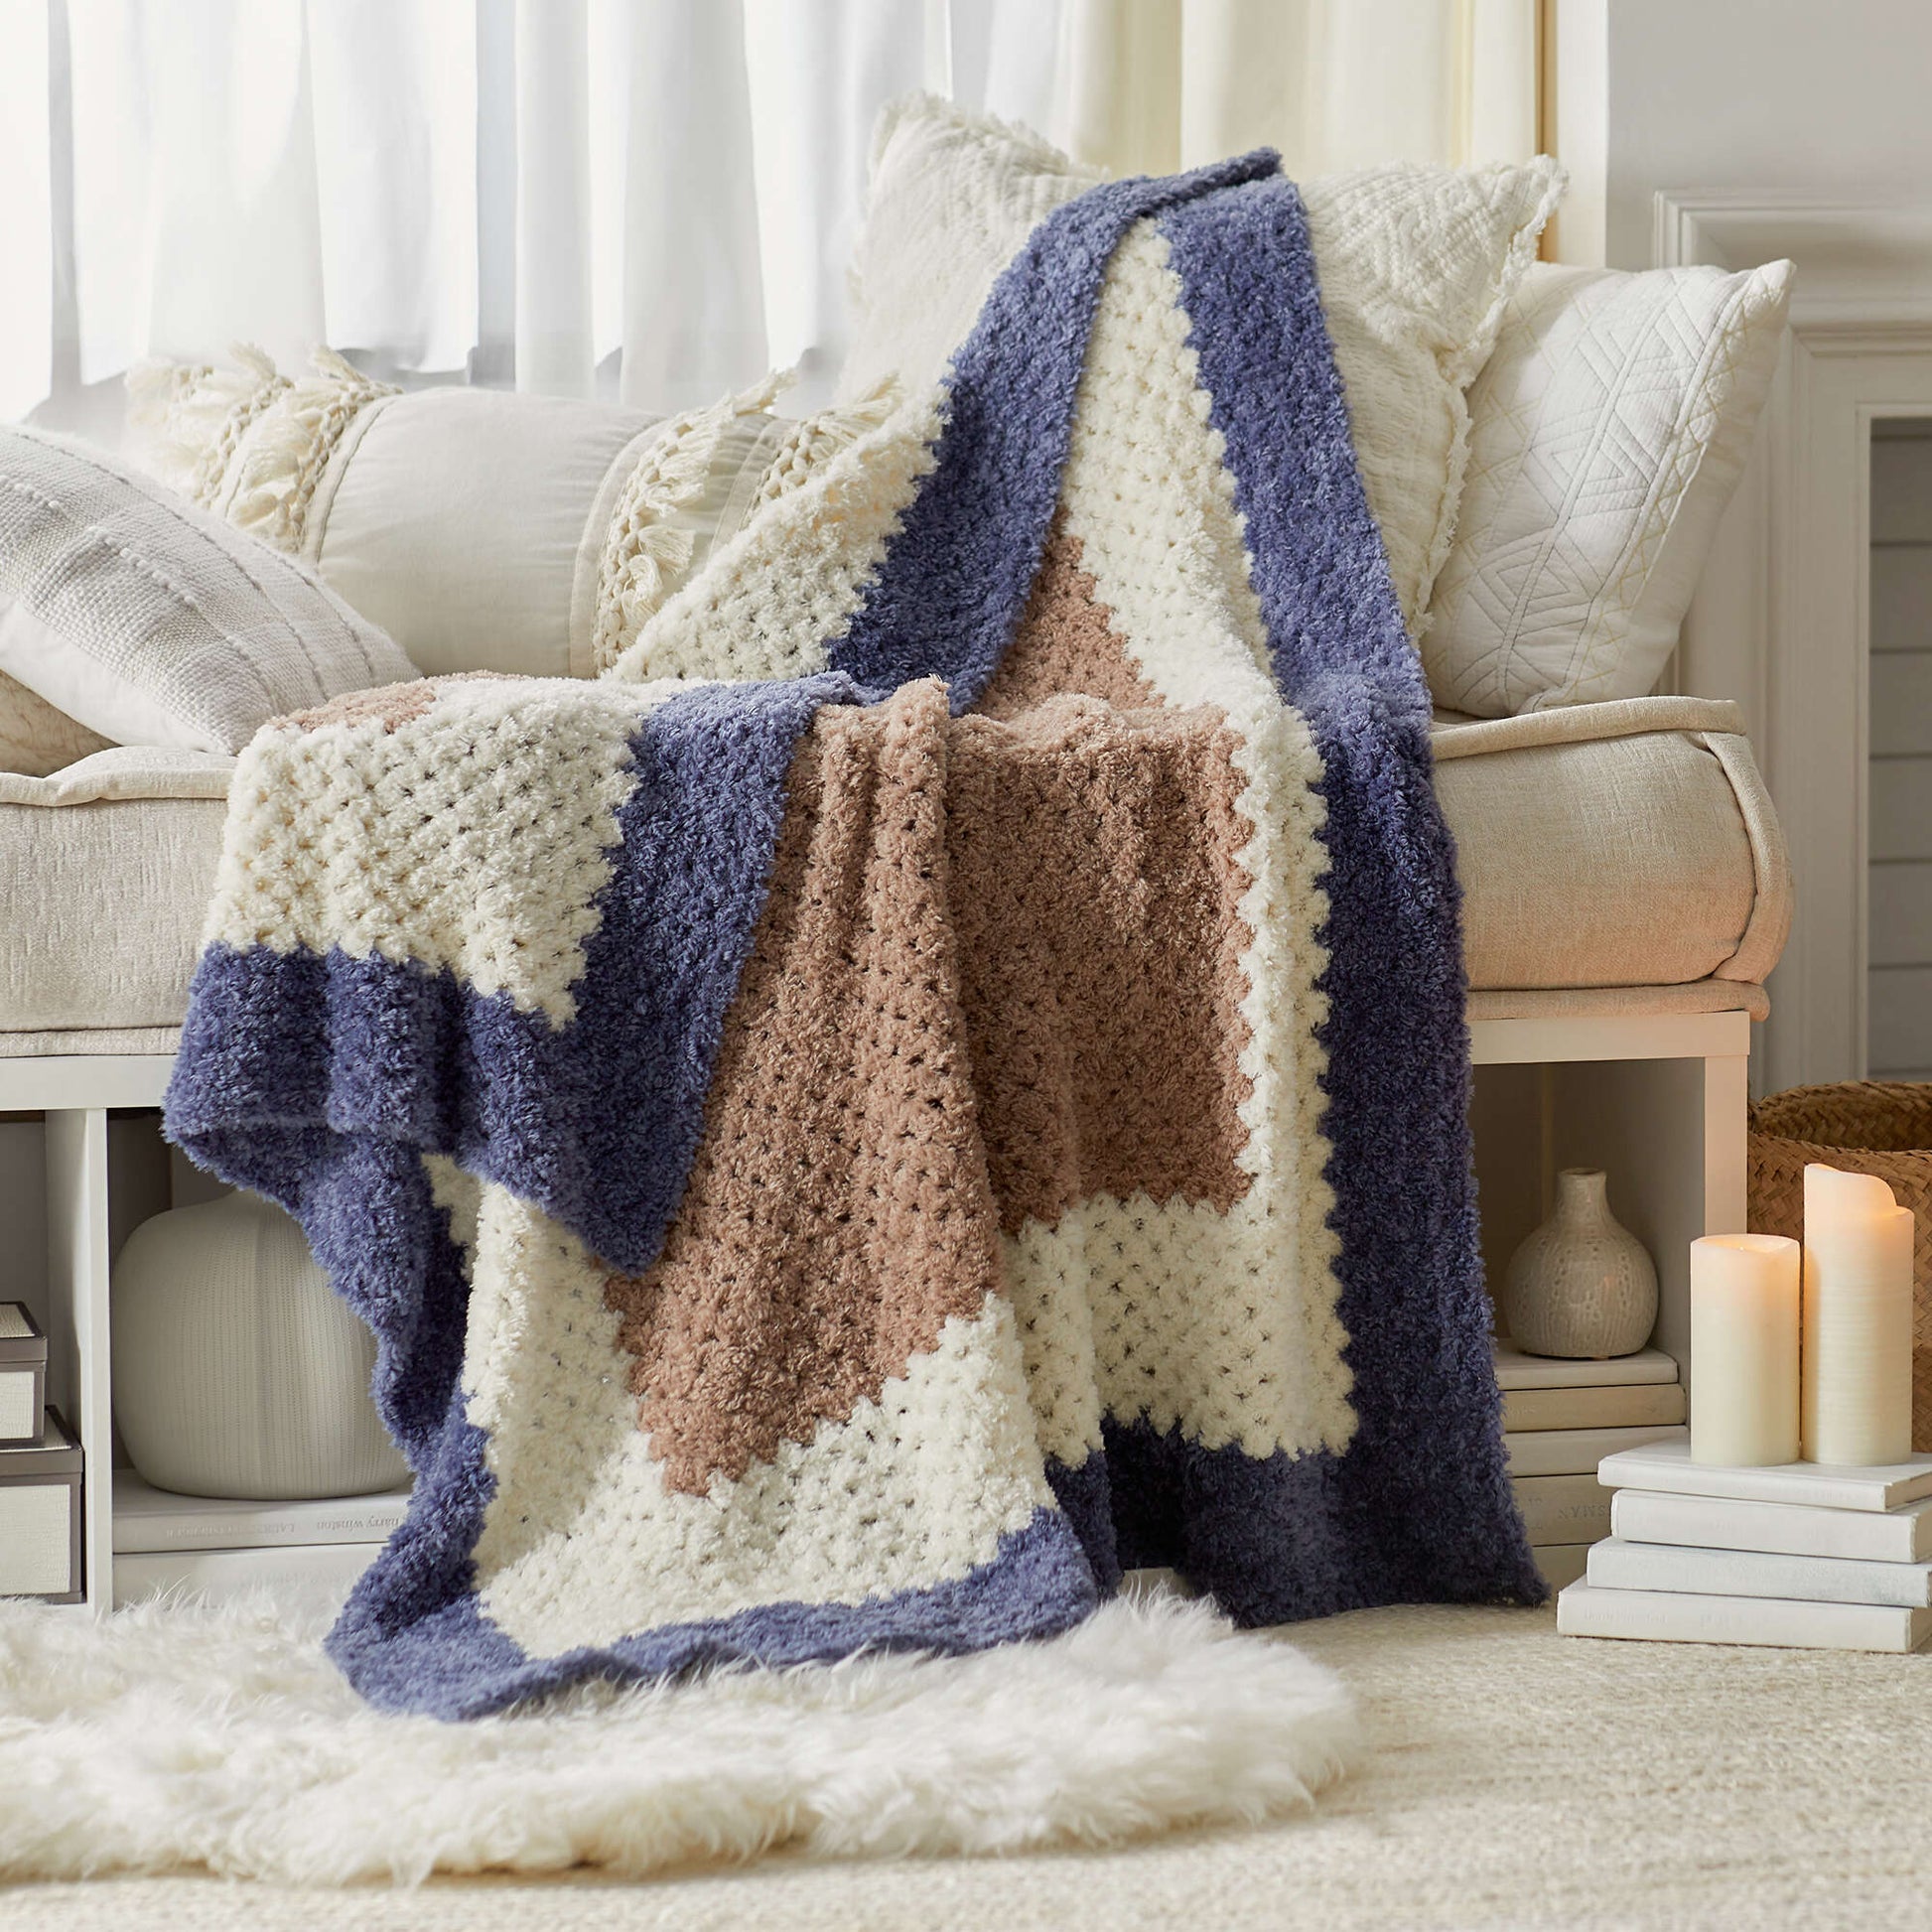 Free Red Heart Hygge At Home Throw Crochet Pattern